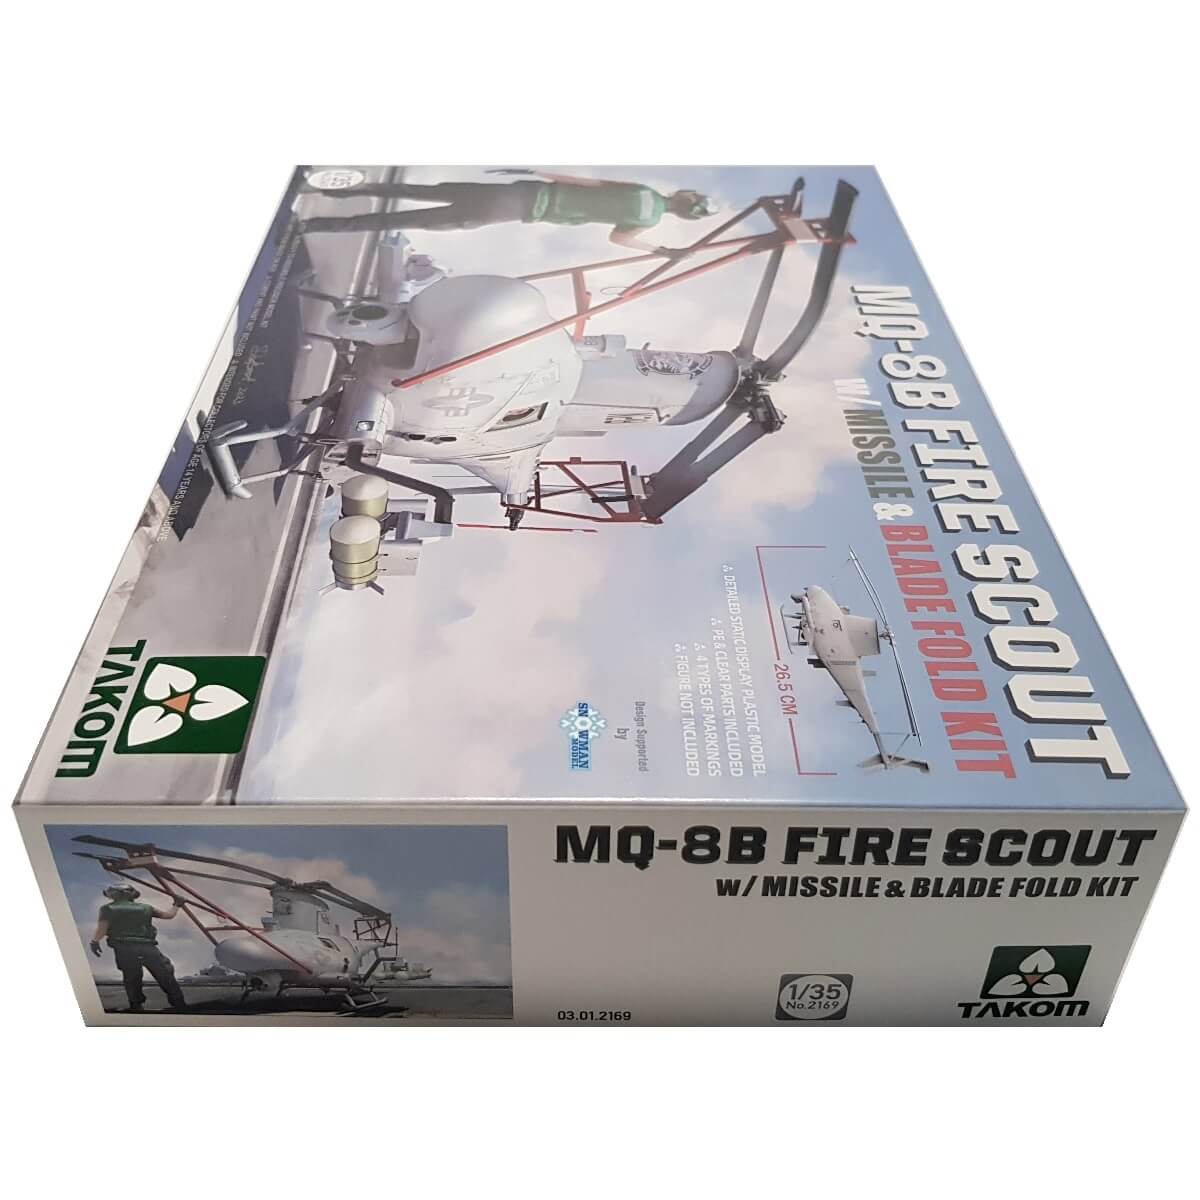 1:35 MQ-8B Fire Scout with Missile and Blade fold kit - TAKOM